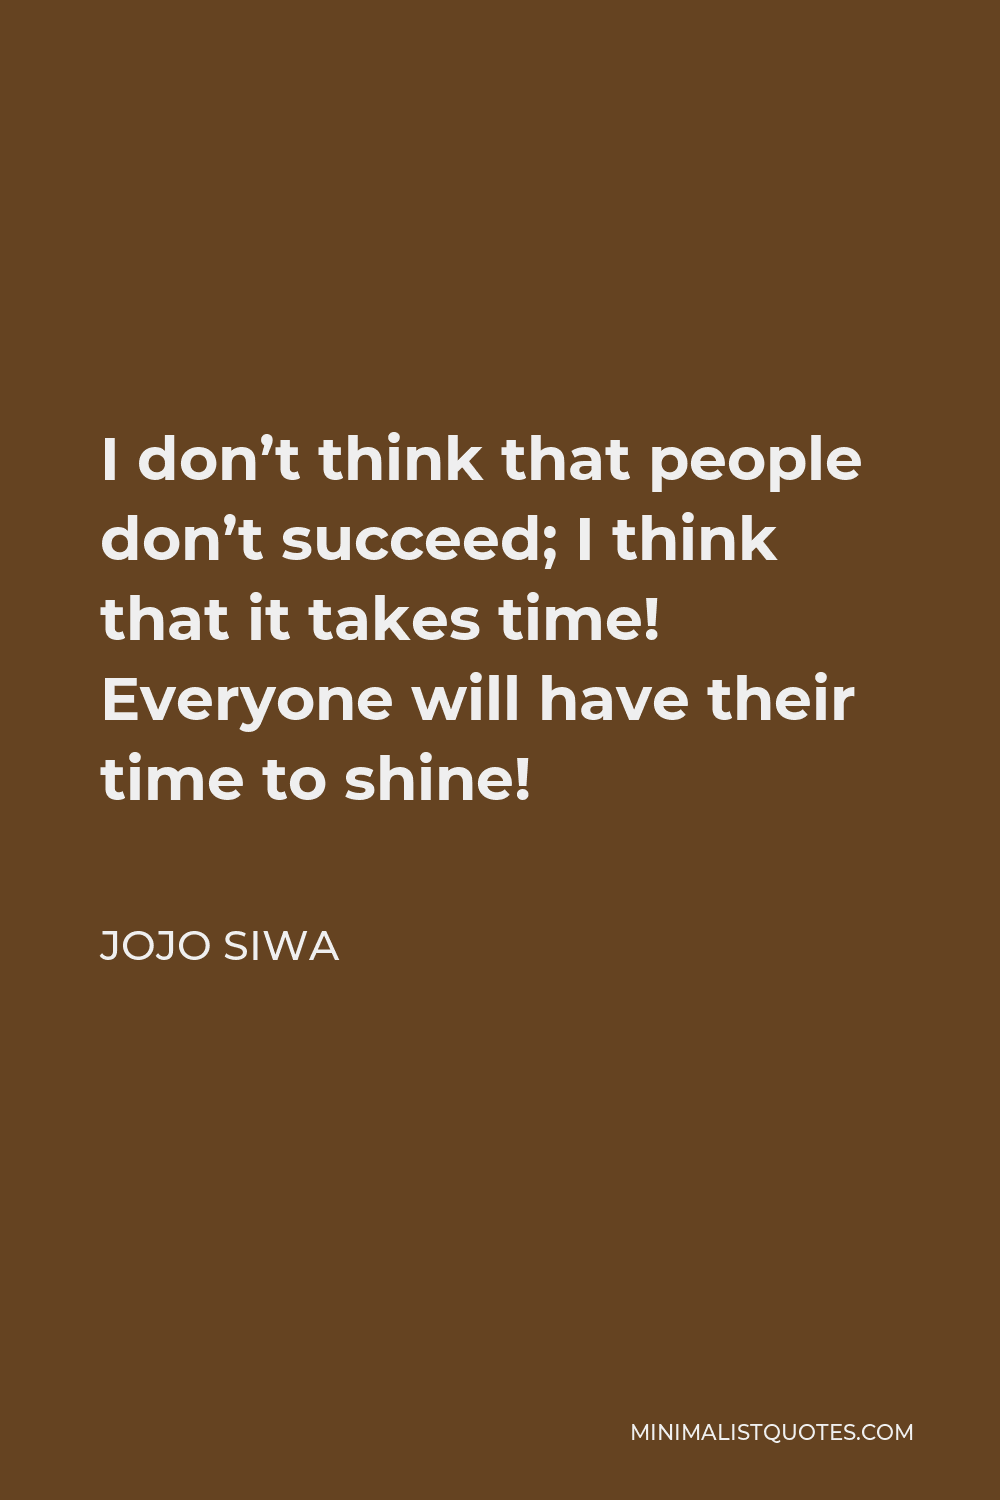 JoJo Siwa Quote - I don’t think that people don’t succeed; I think that it takes time! Everyone will have their time to shine!